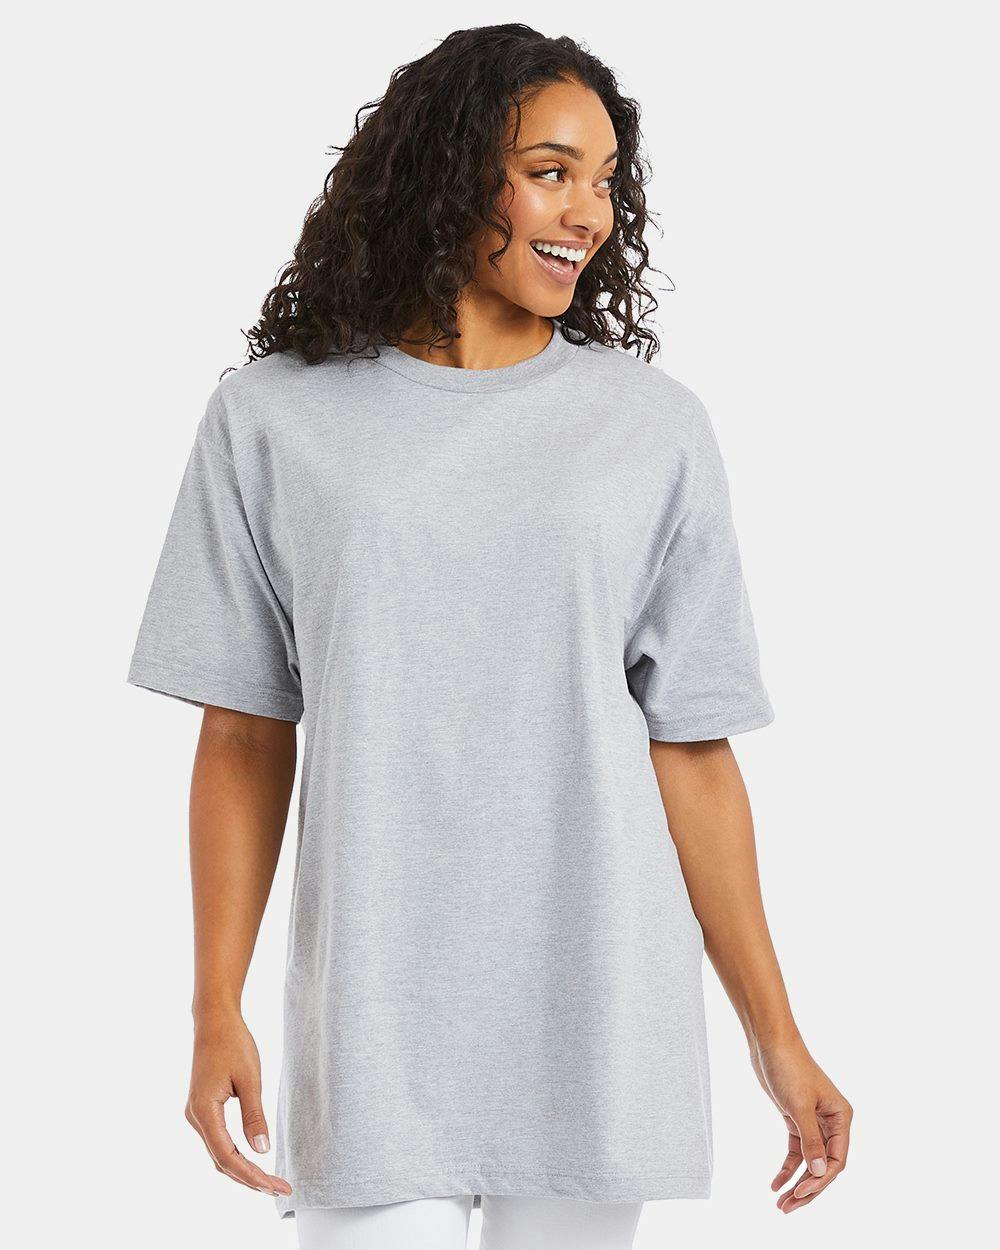 Image for Beefy-T® Tall T-Shirt - 518T